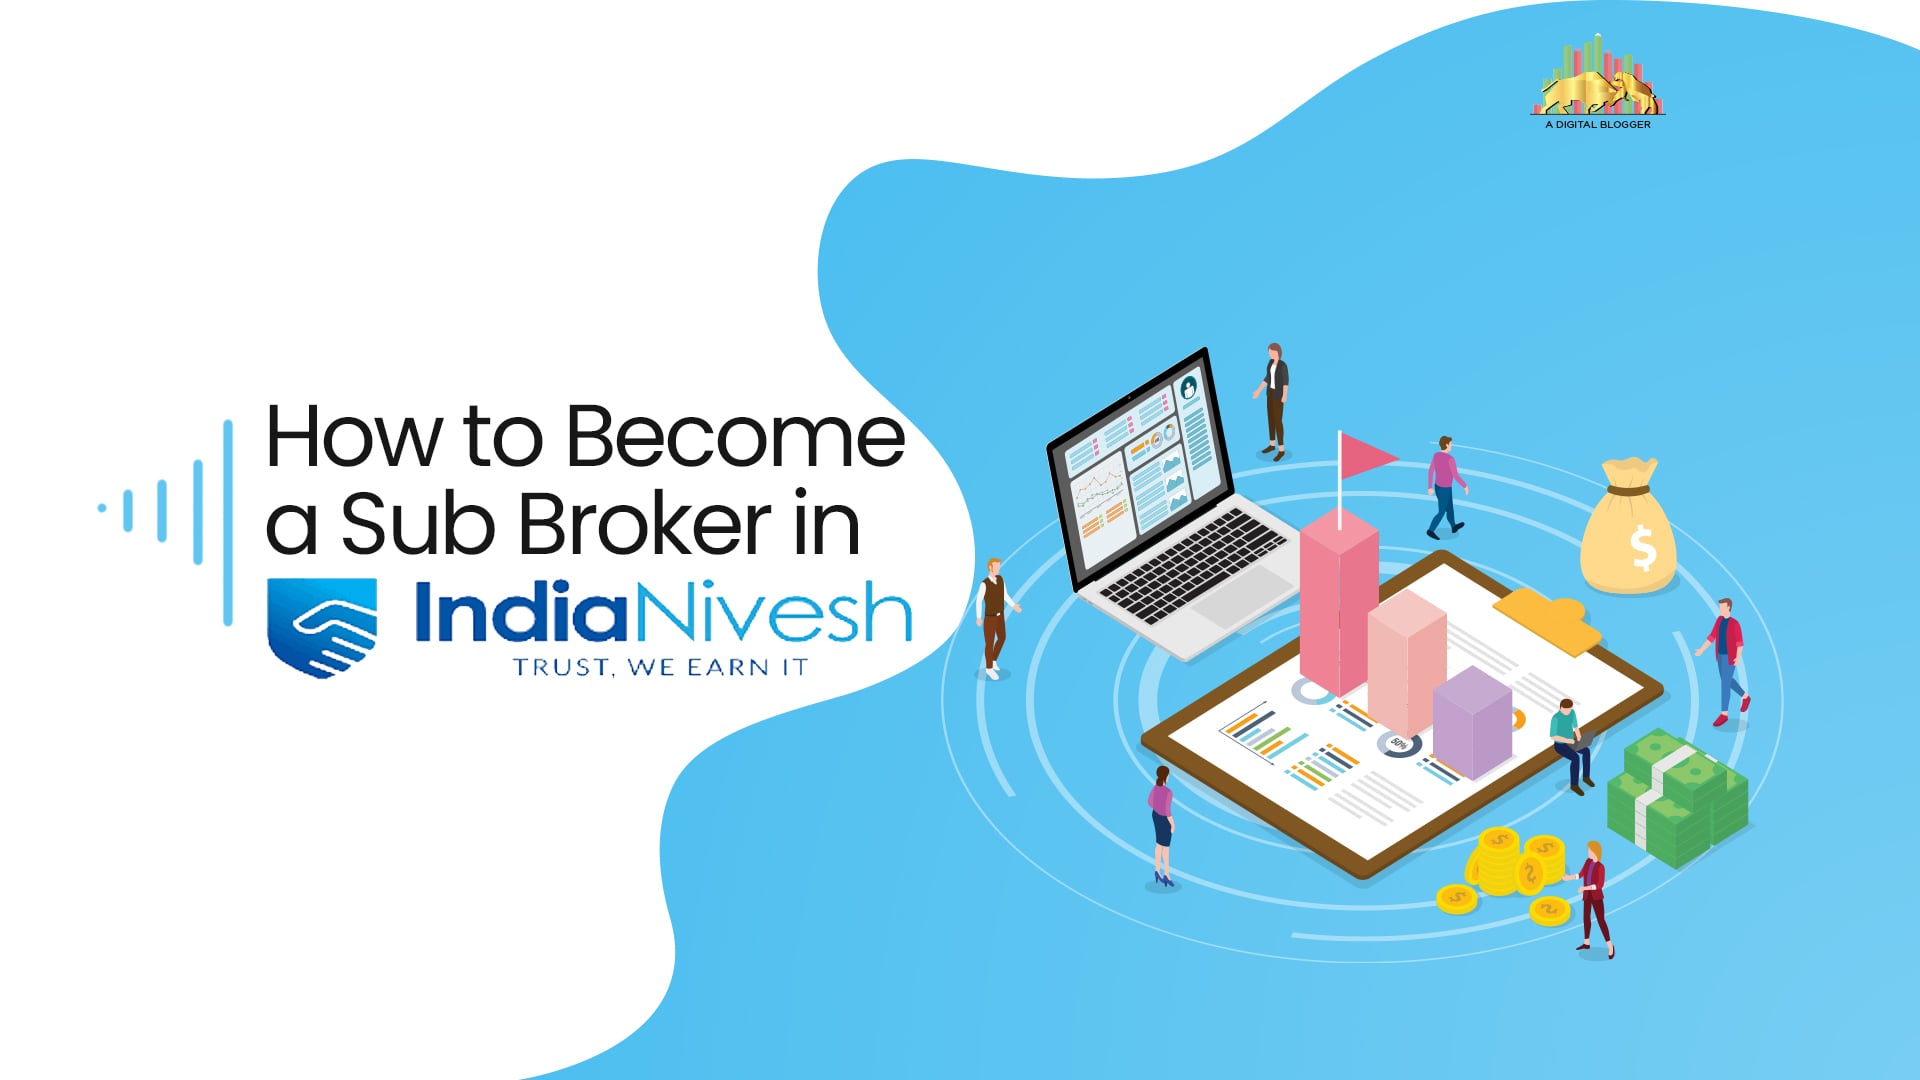 Process To Become a Sub Broker in IndiaNivesh